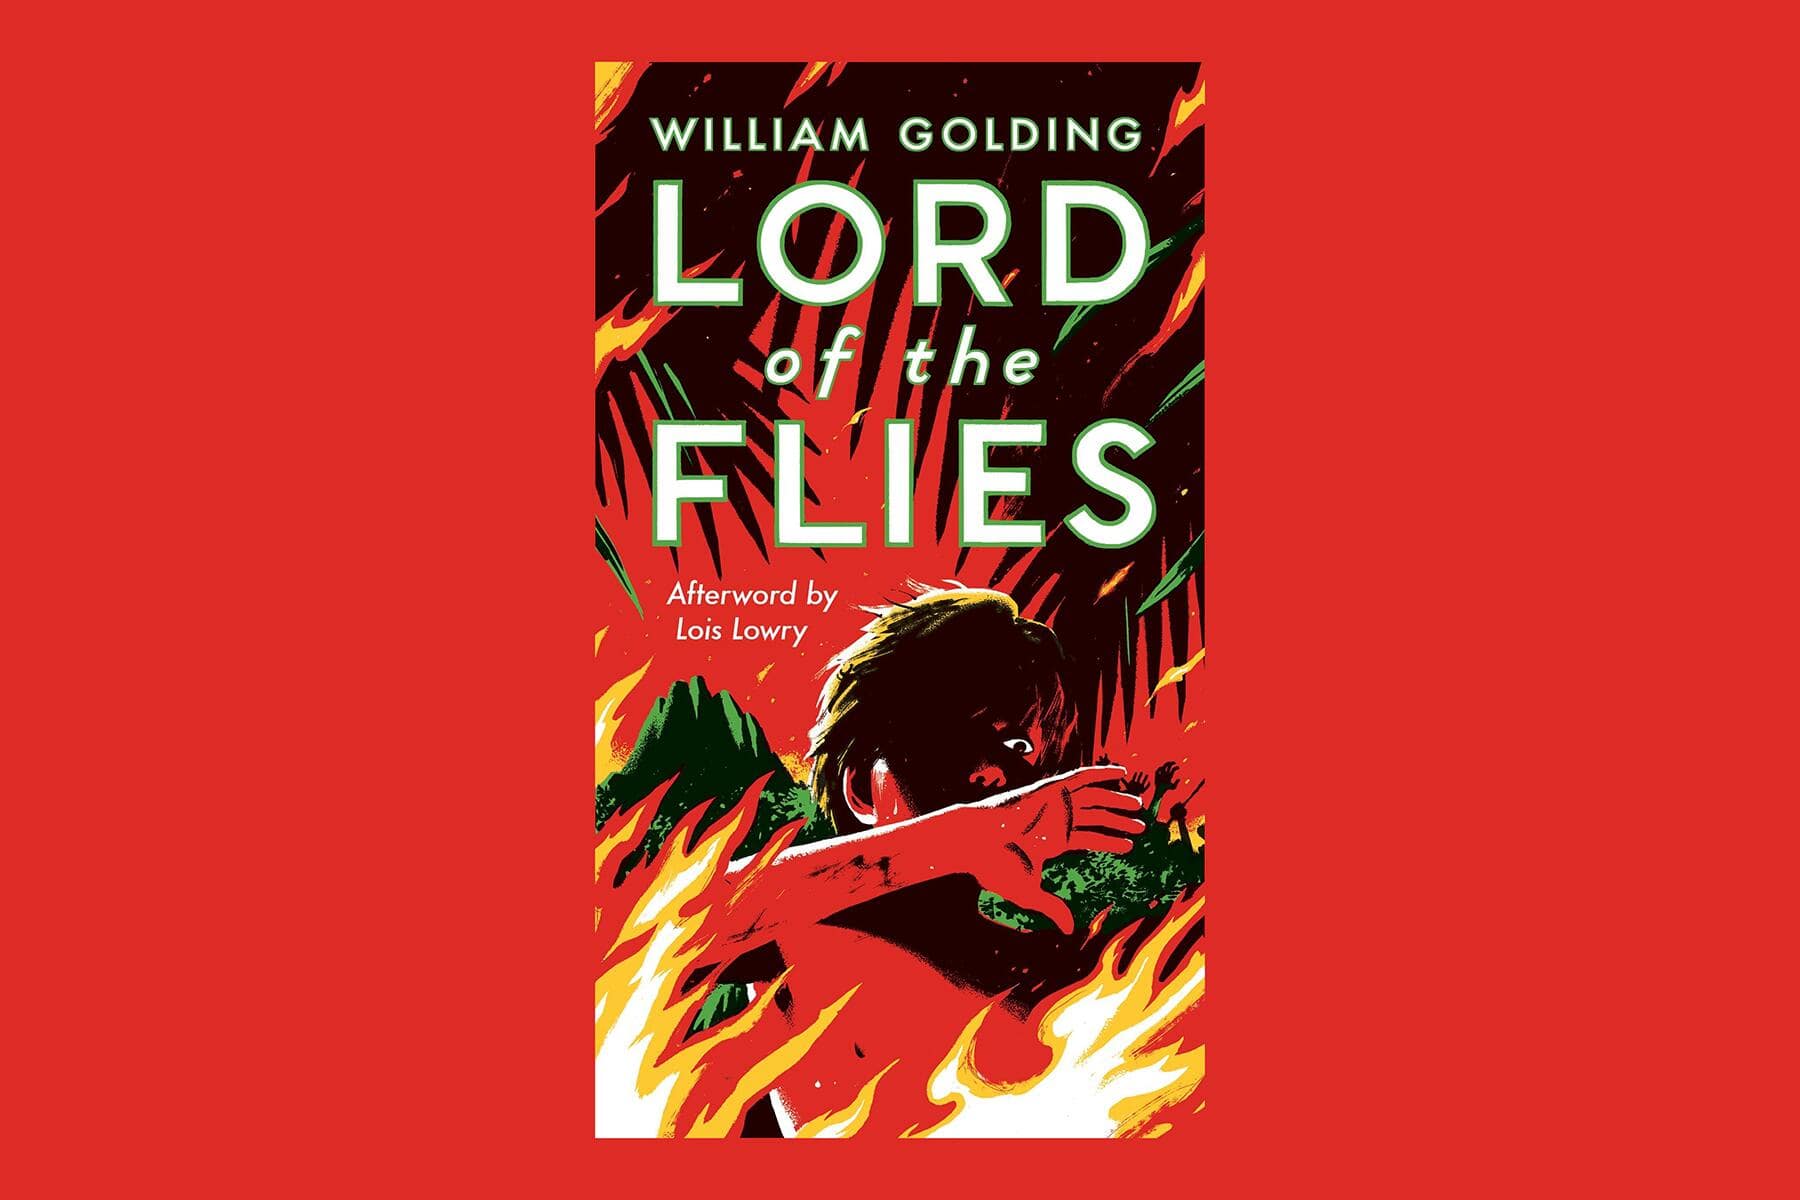 <a href='https://www.fodors.com/world/europe/england/experiences/news/photos/what-tea-to-drink-with-british-classic-literature#'>From &quot;Teas to Pair With Your Favorite British Classics: 'Lord of the Flies' by William Golding&quot;</a>